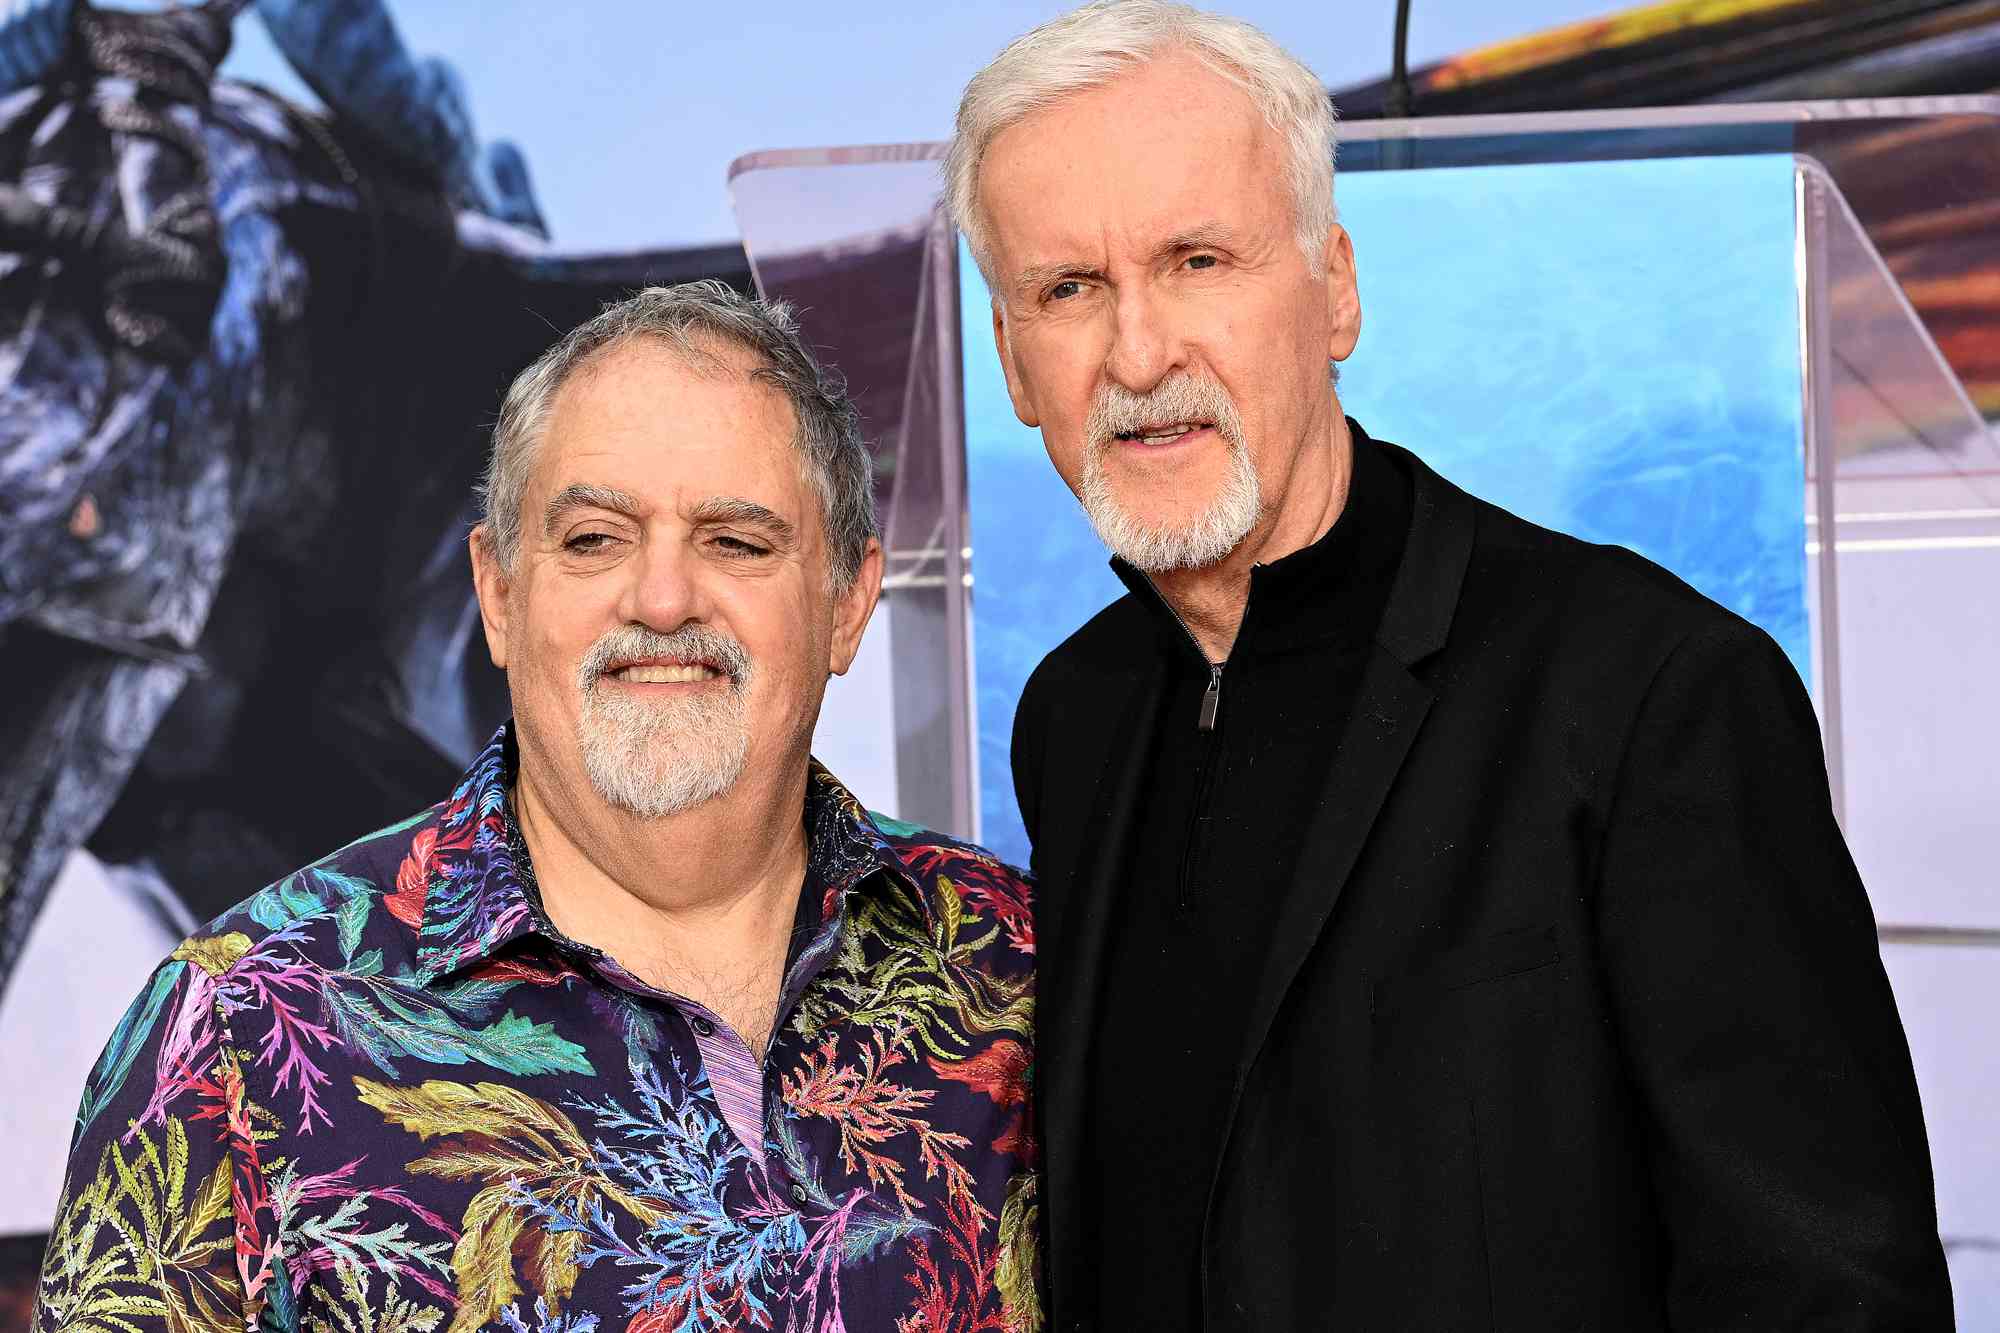 Jon Landau and James Cameron are seen at the Hand and Footprint Ceremony for Director James Cameron and Producer Jon Landau held at TCL Chinese Theatre on January 12, 2023 in Hollywood, California.